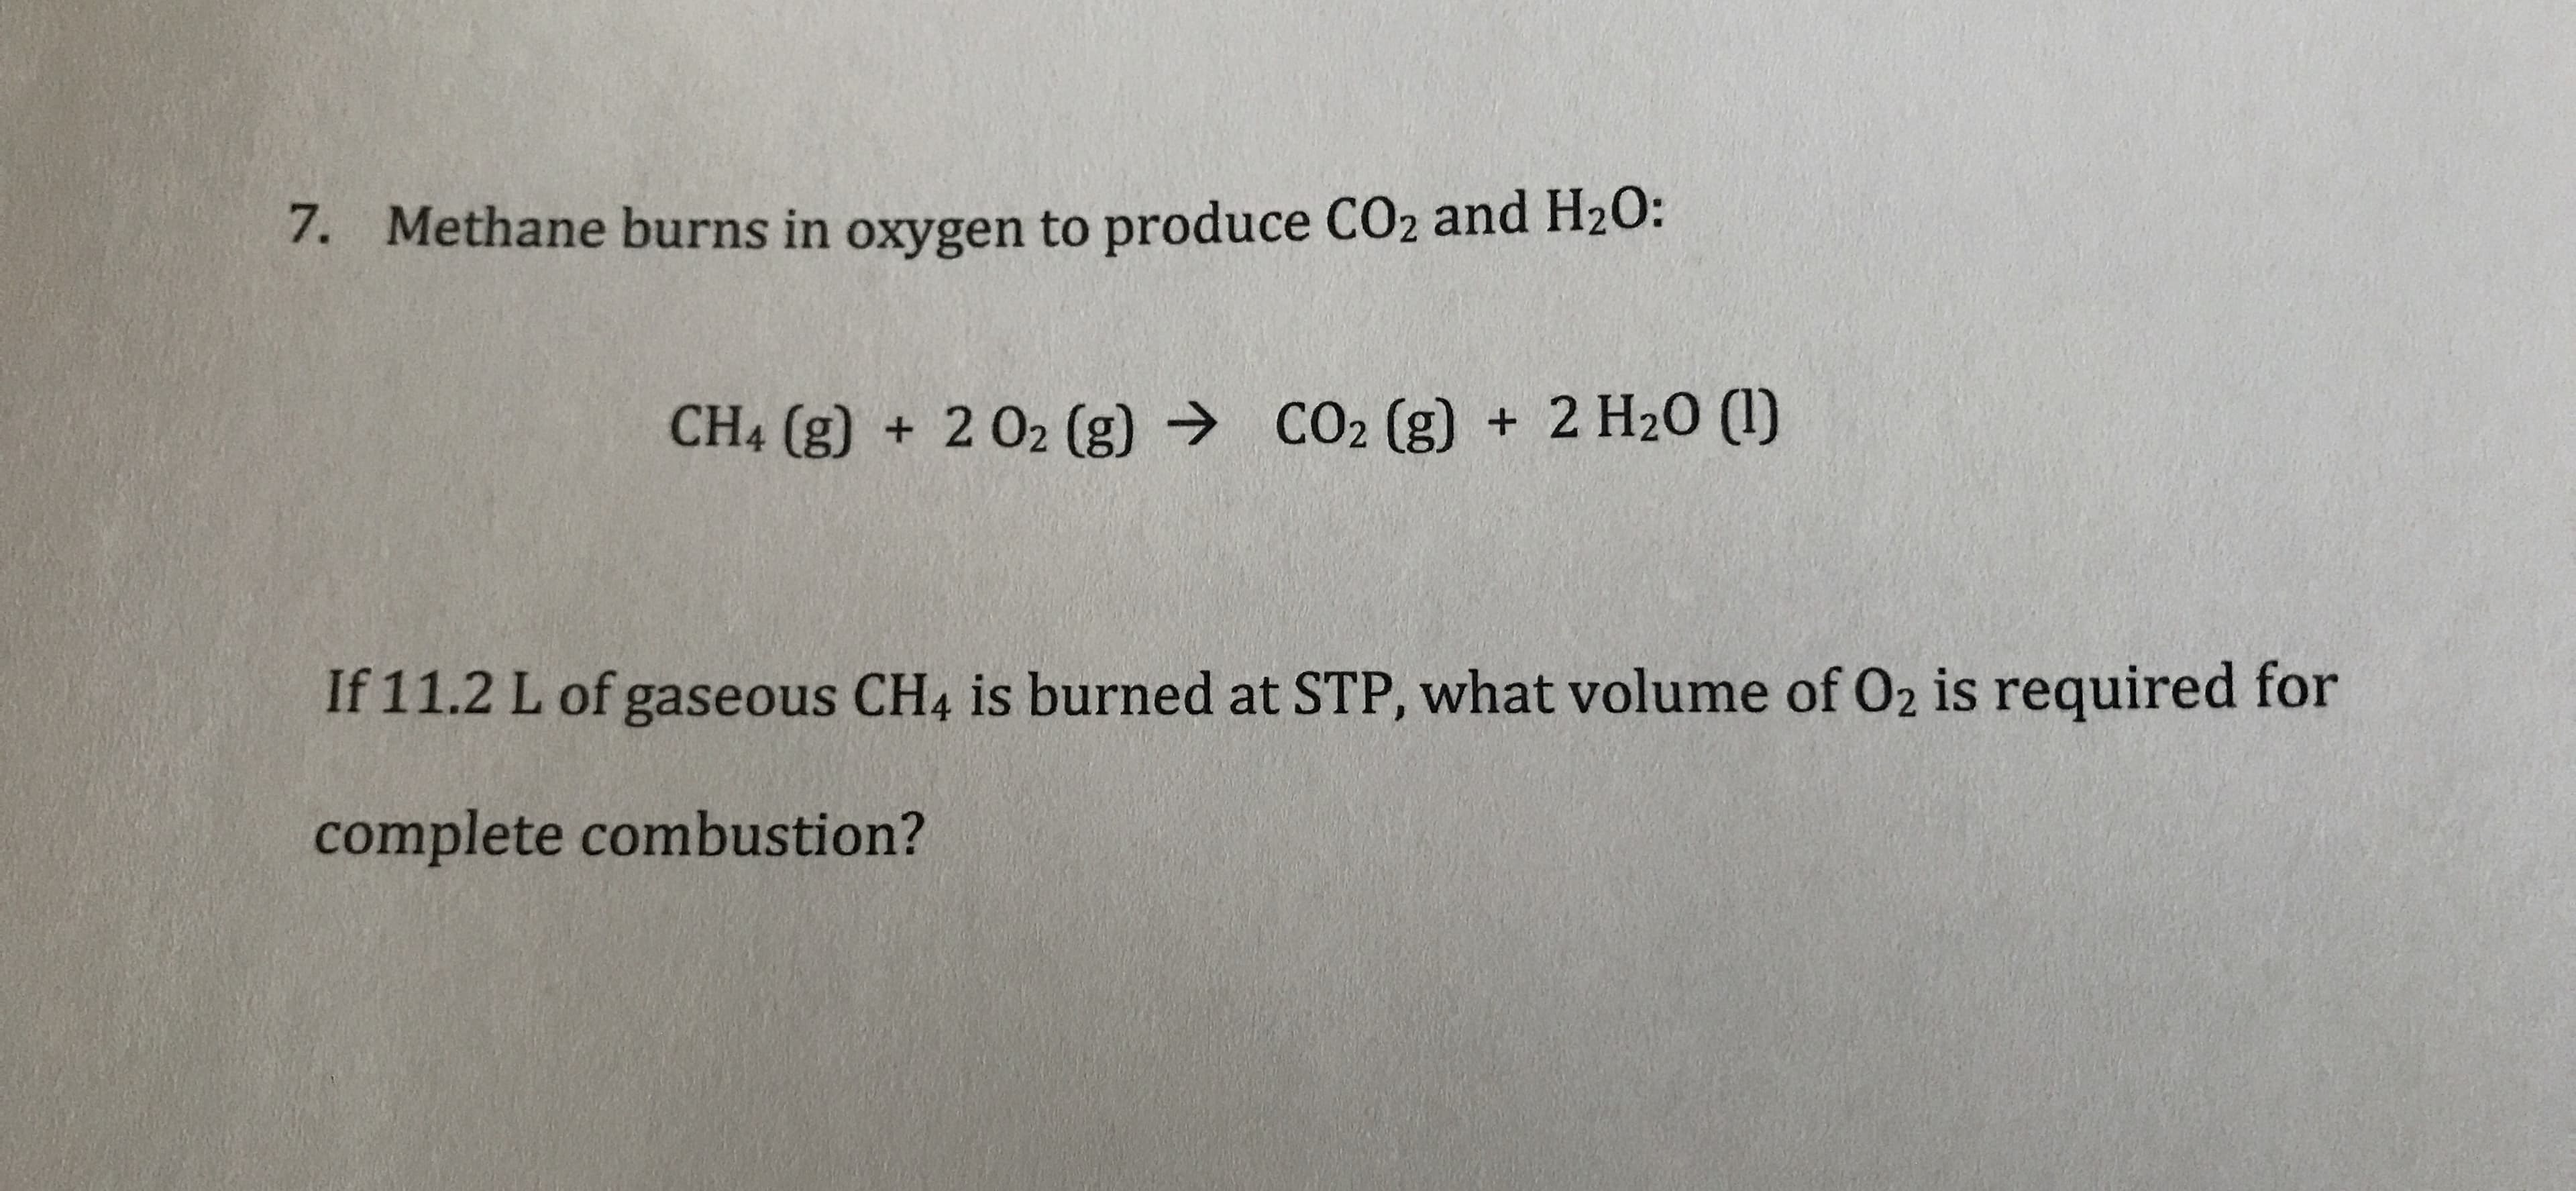 Methane burns in oxygen to produce CO2 and H20:
7.
CO2 (g) +2 H20 ()
CH4 (g) + 202 (g)
If 11.2 L of gaseous CH4 is burned at STP, what volume of O2 is required for
complete combustion?
